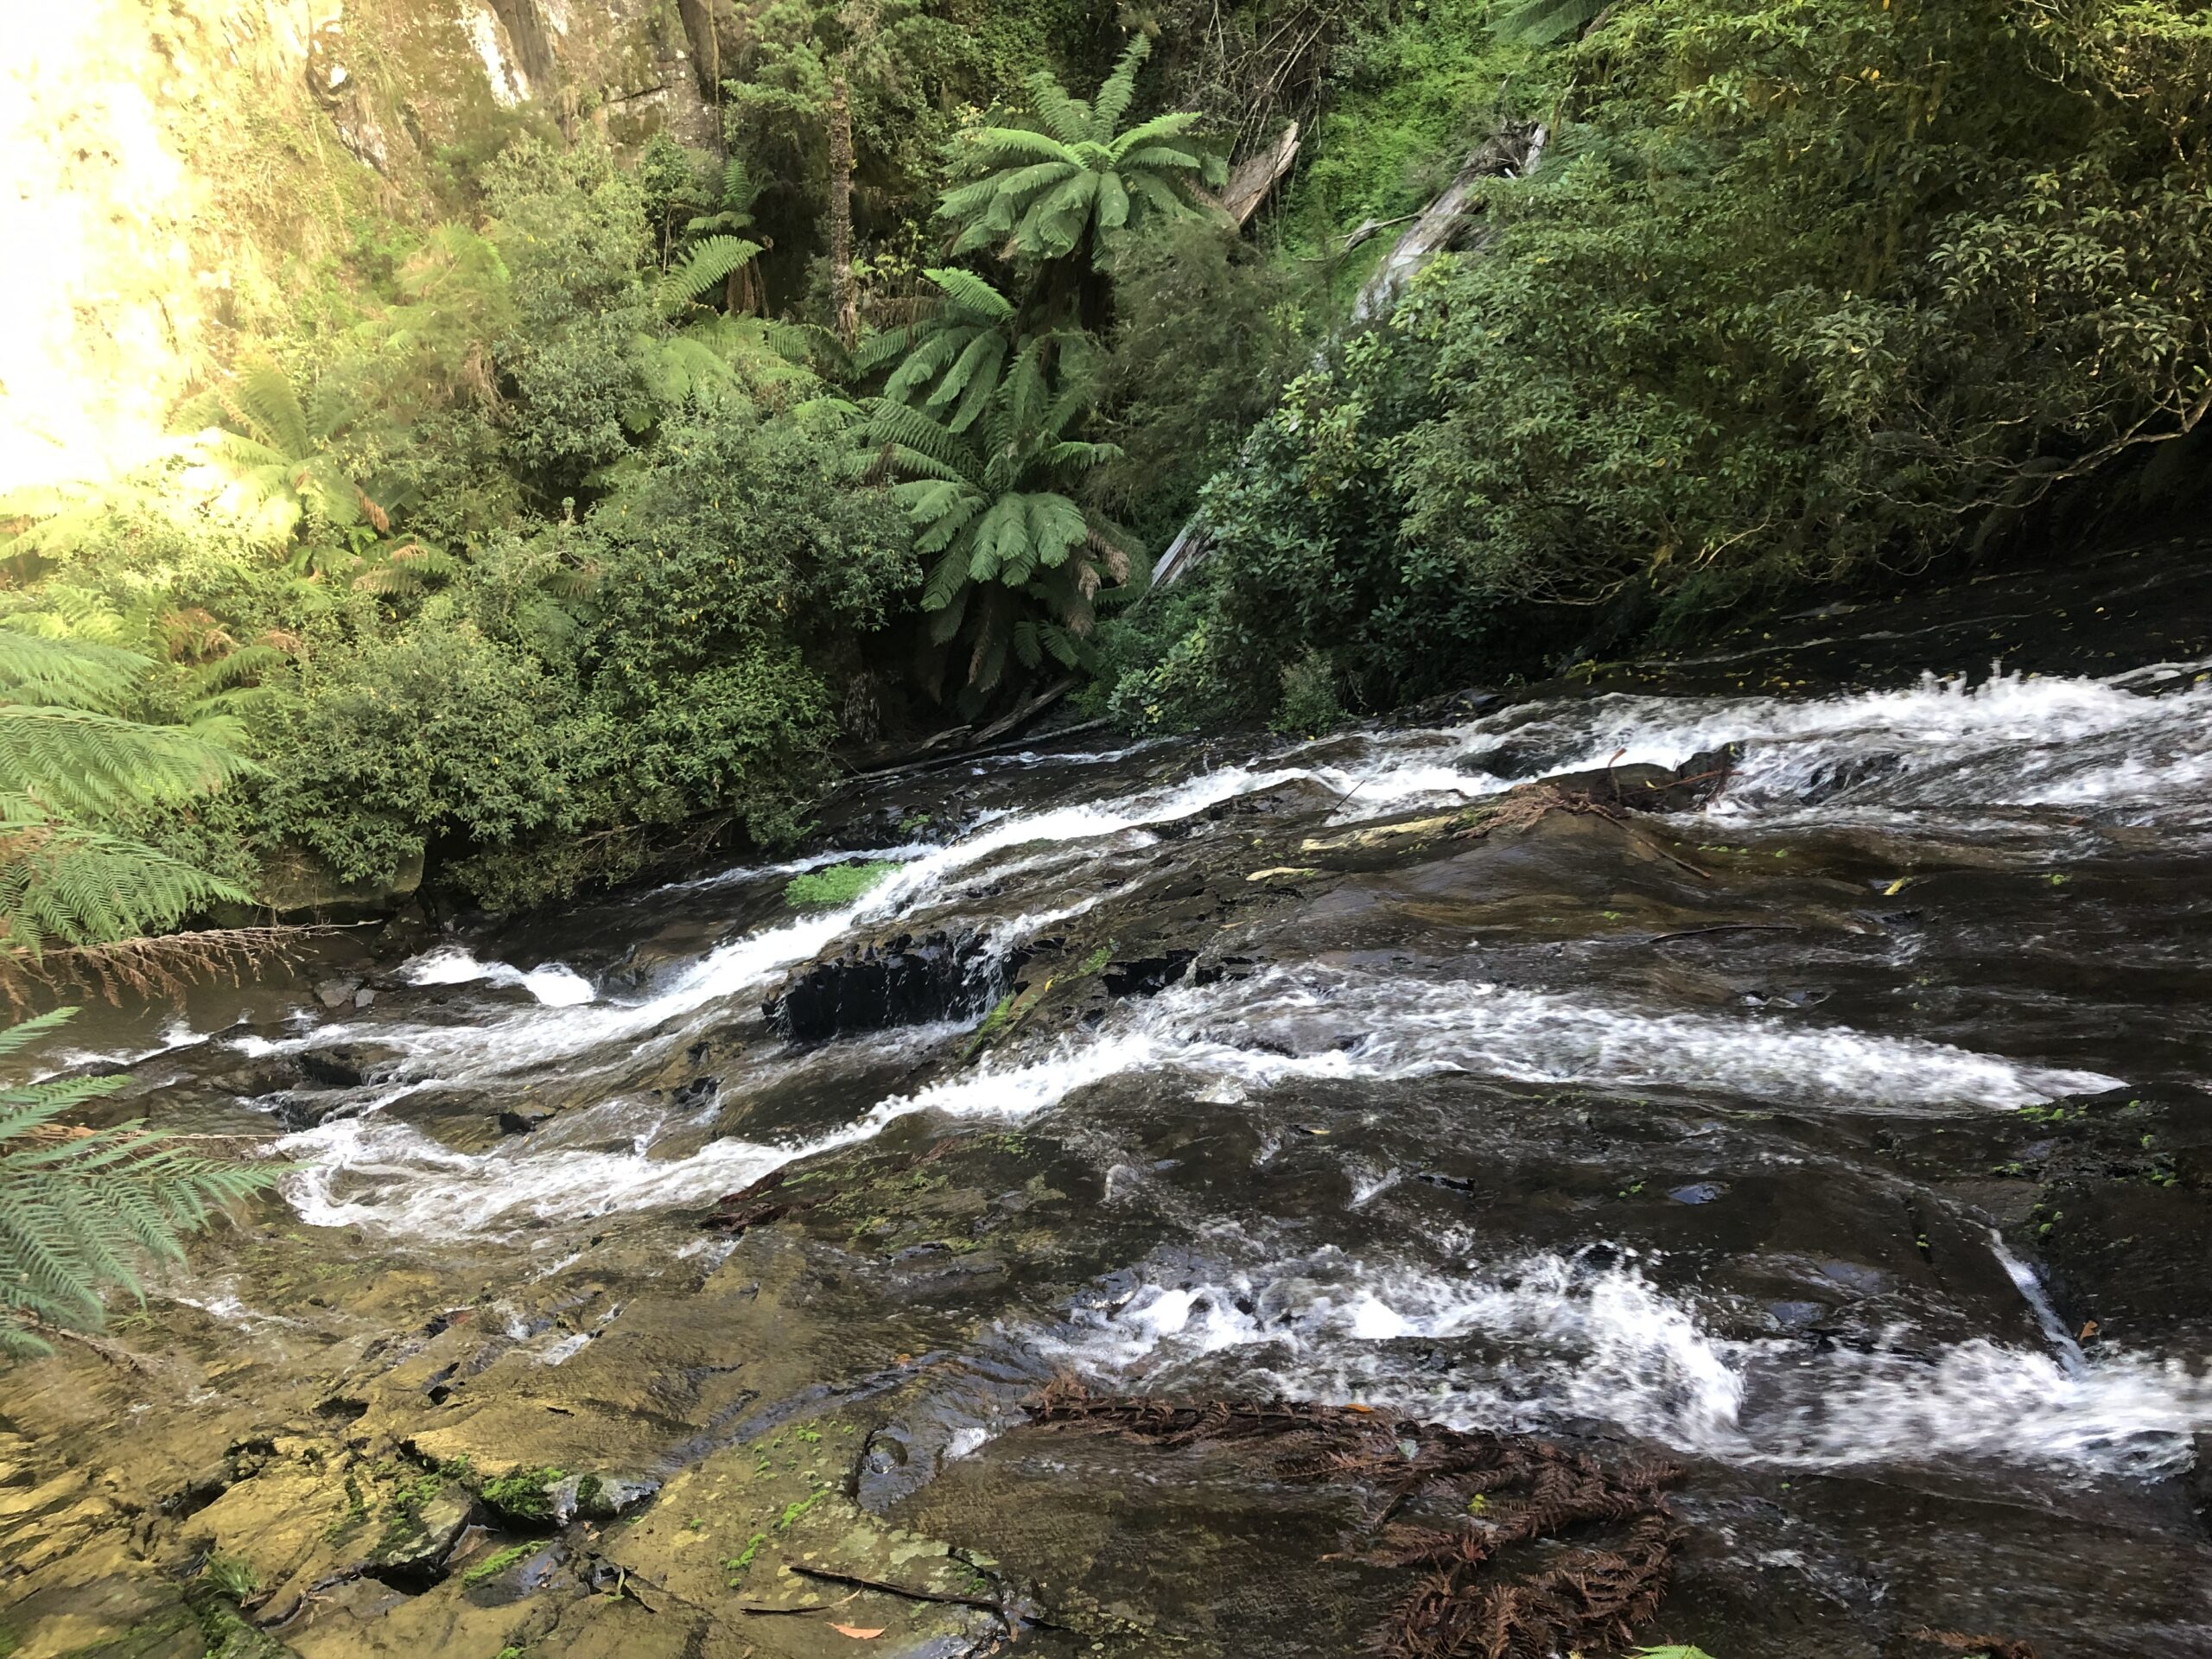 Tarra Valley waterfall from above